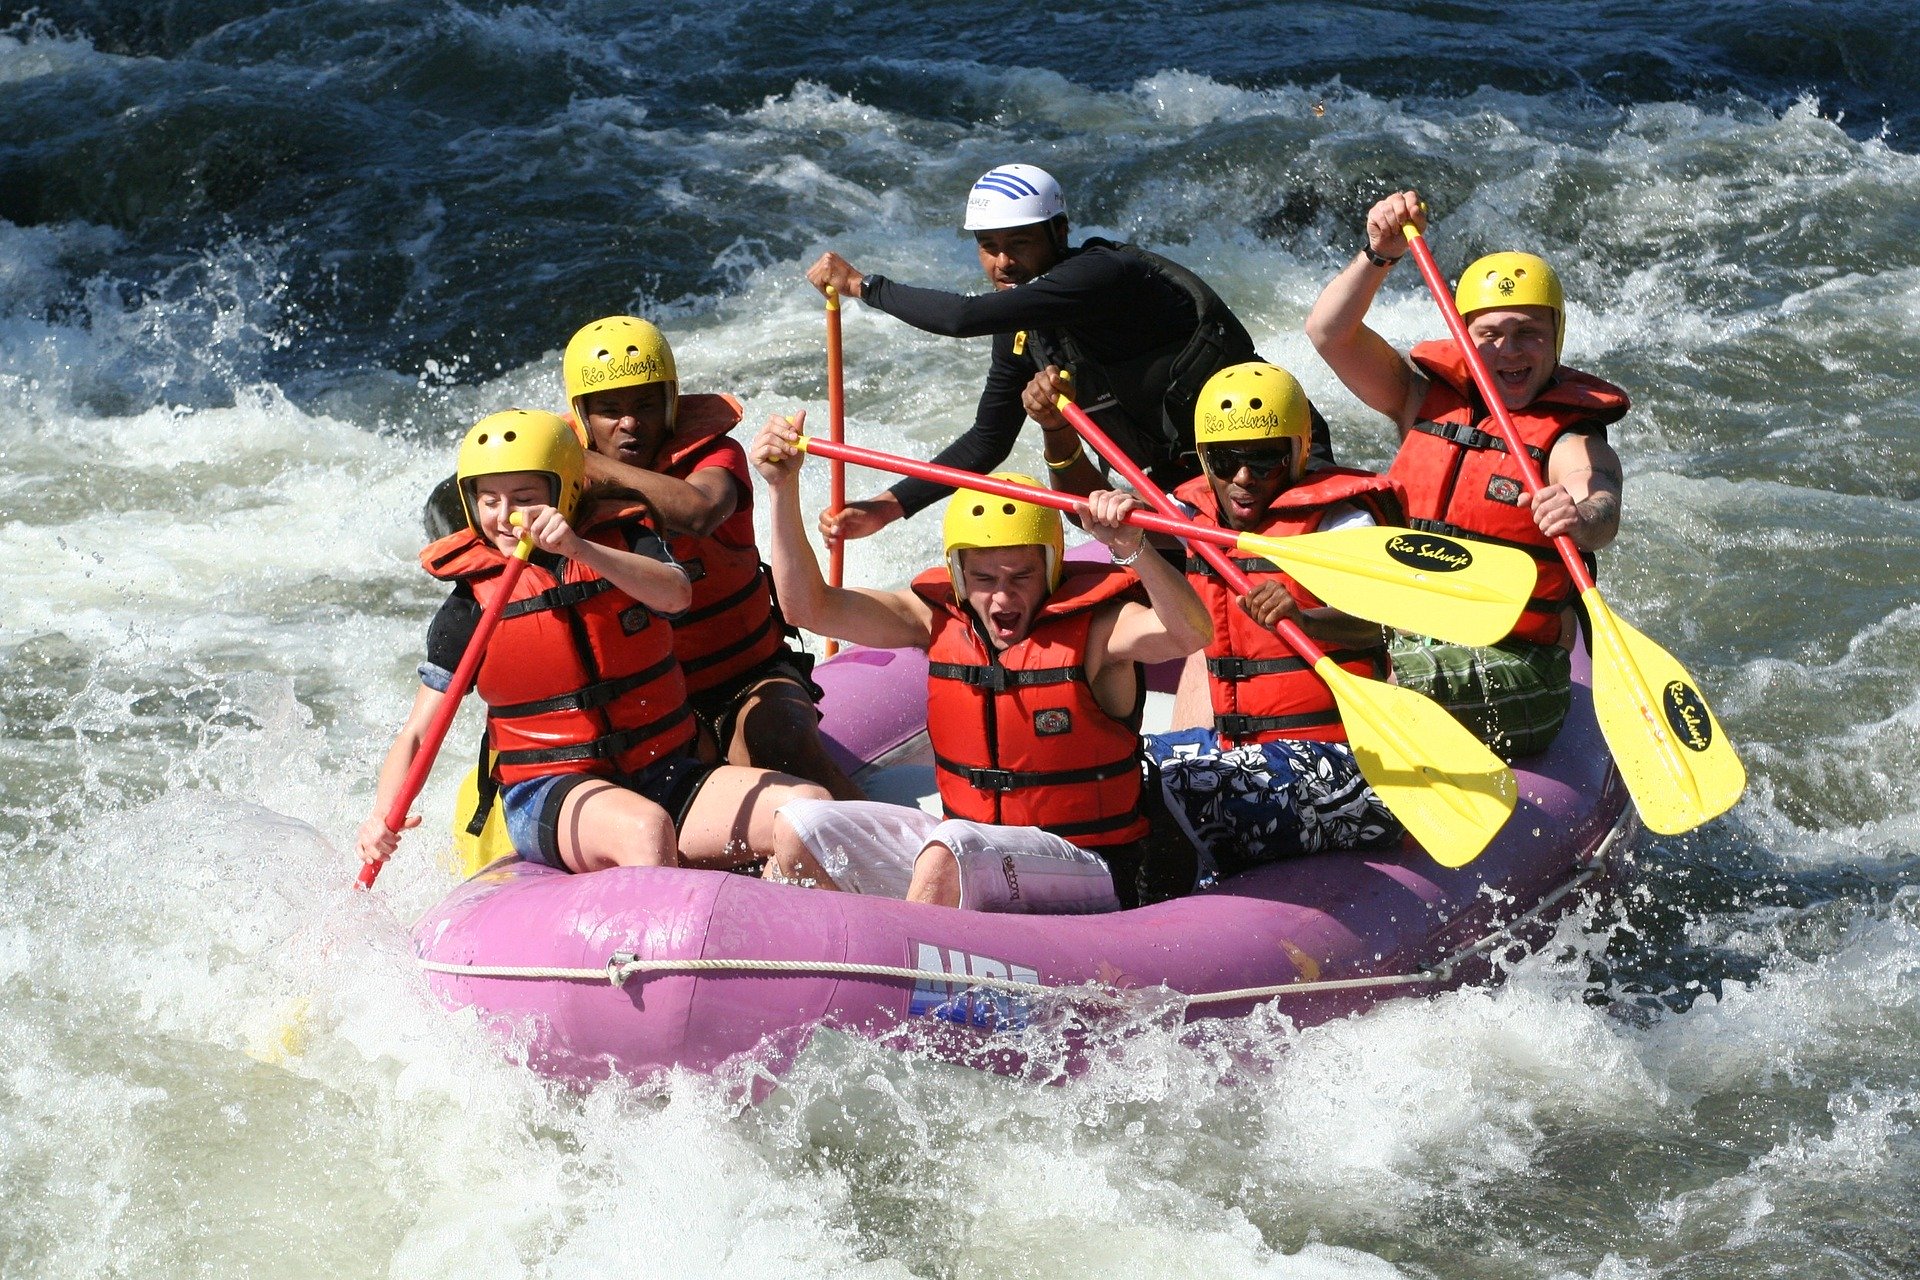 Enjoy rafting this Father’s Day in Winter Park